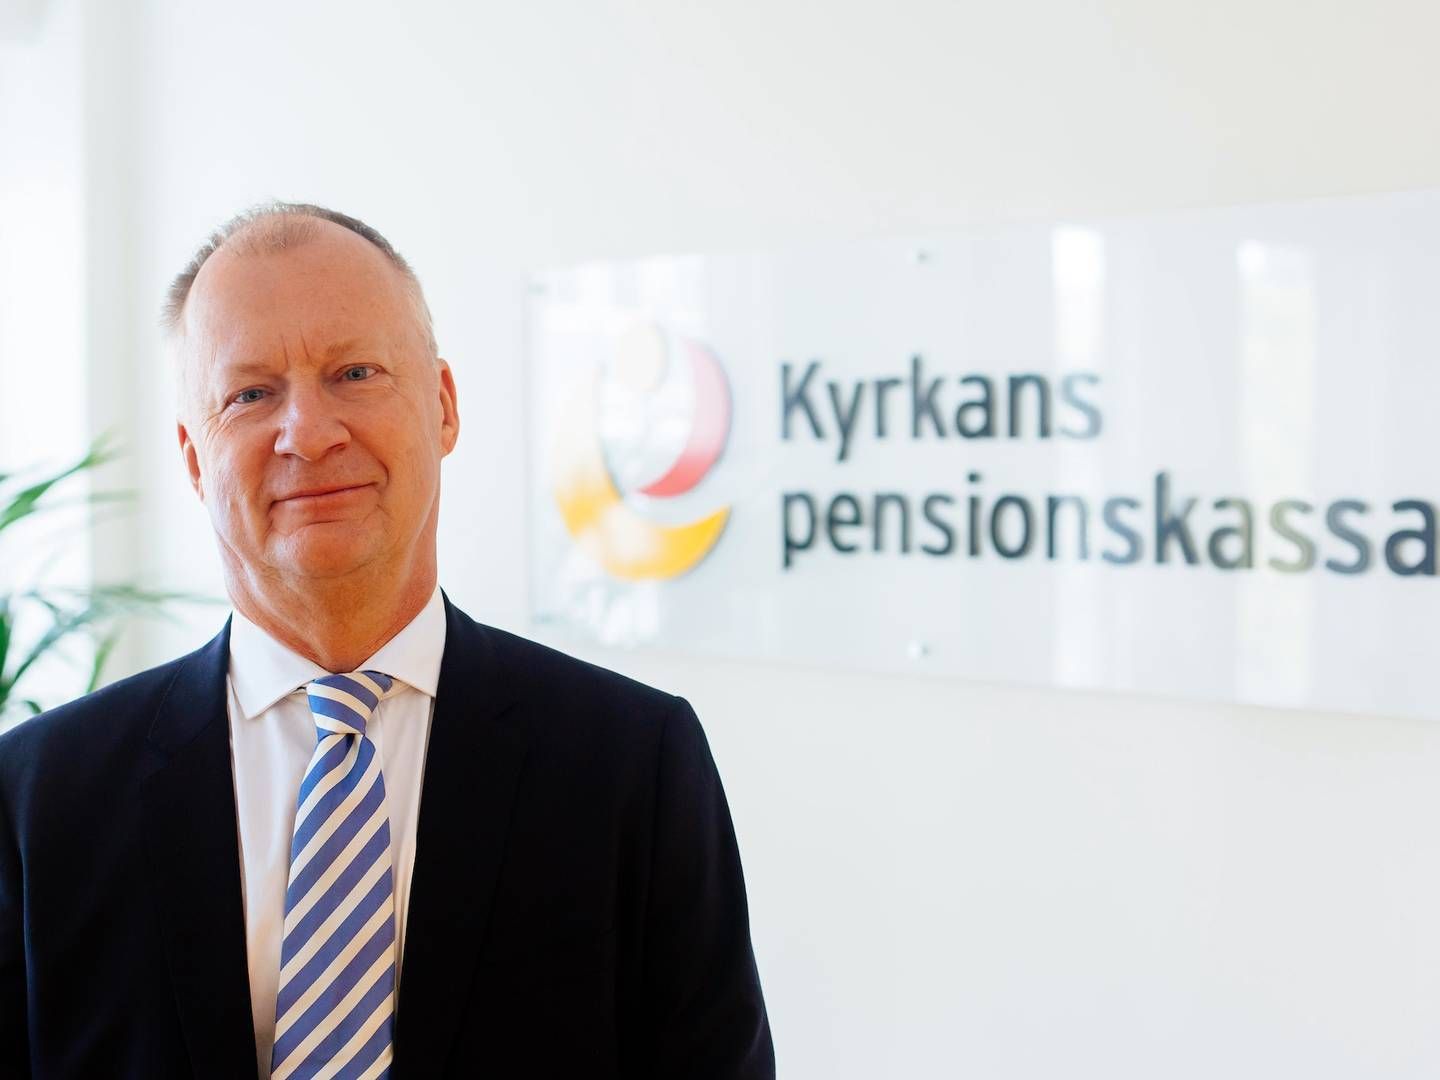 Carl Cederberg is the CEO of the pension fund of the Church of Sweden. | Foto: Kyrkans Pension / PR